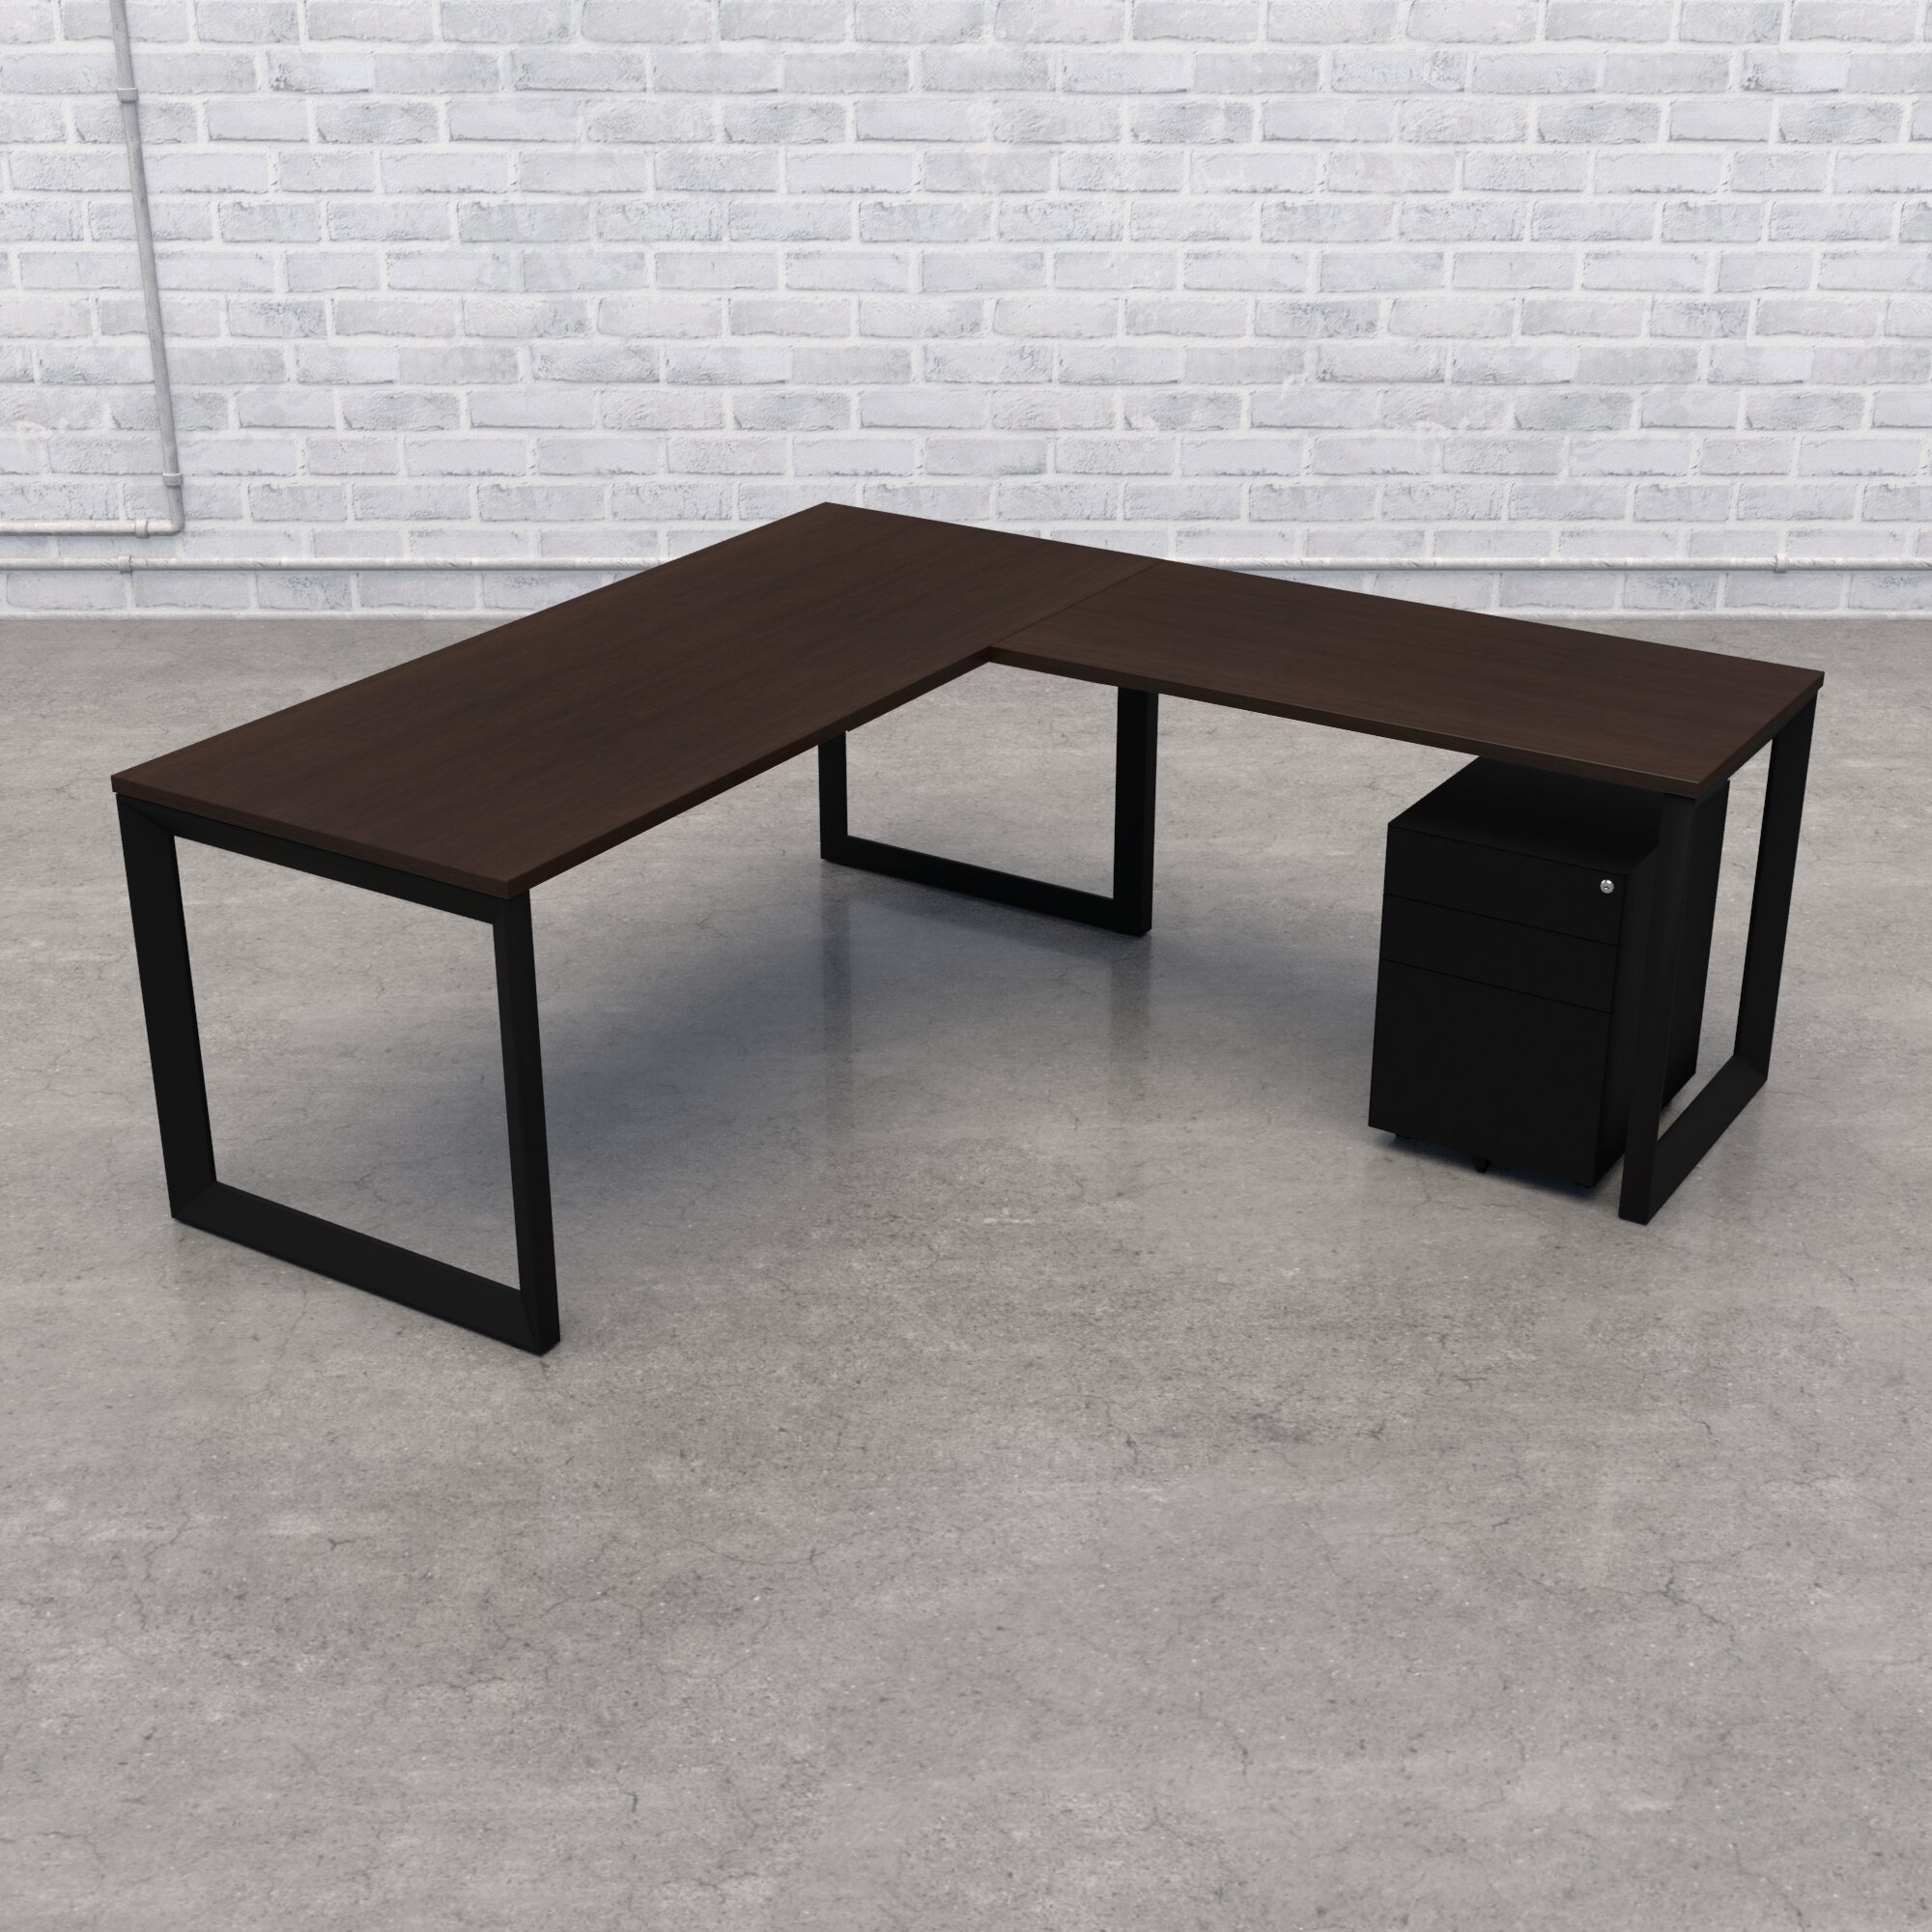 2pc/set H style black metal table legs for home/office desk legs only 